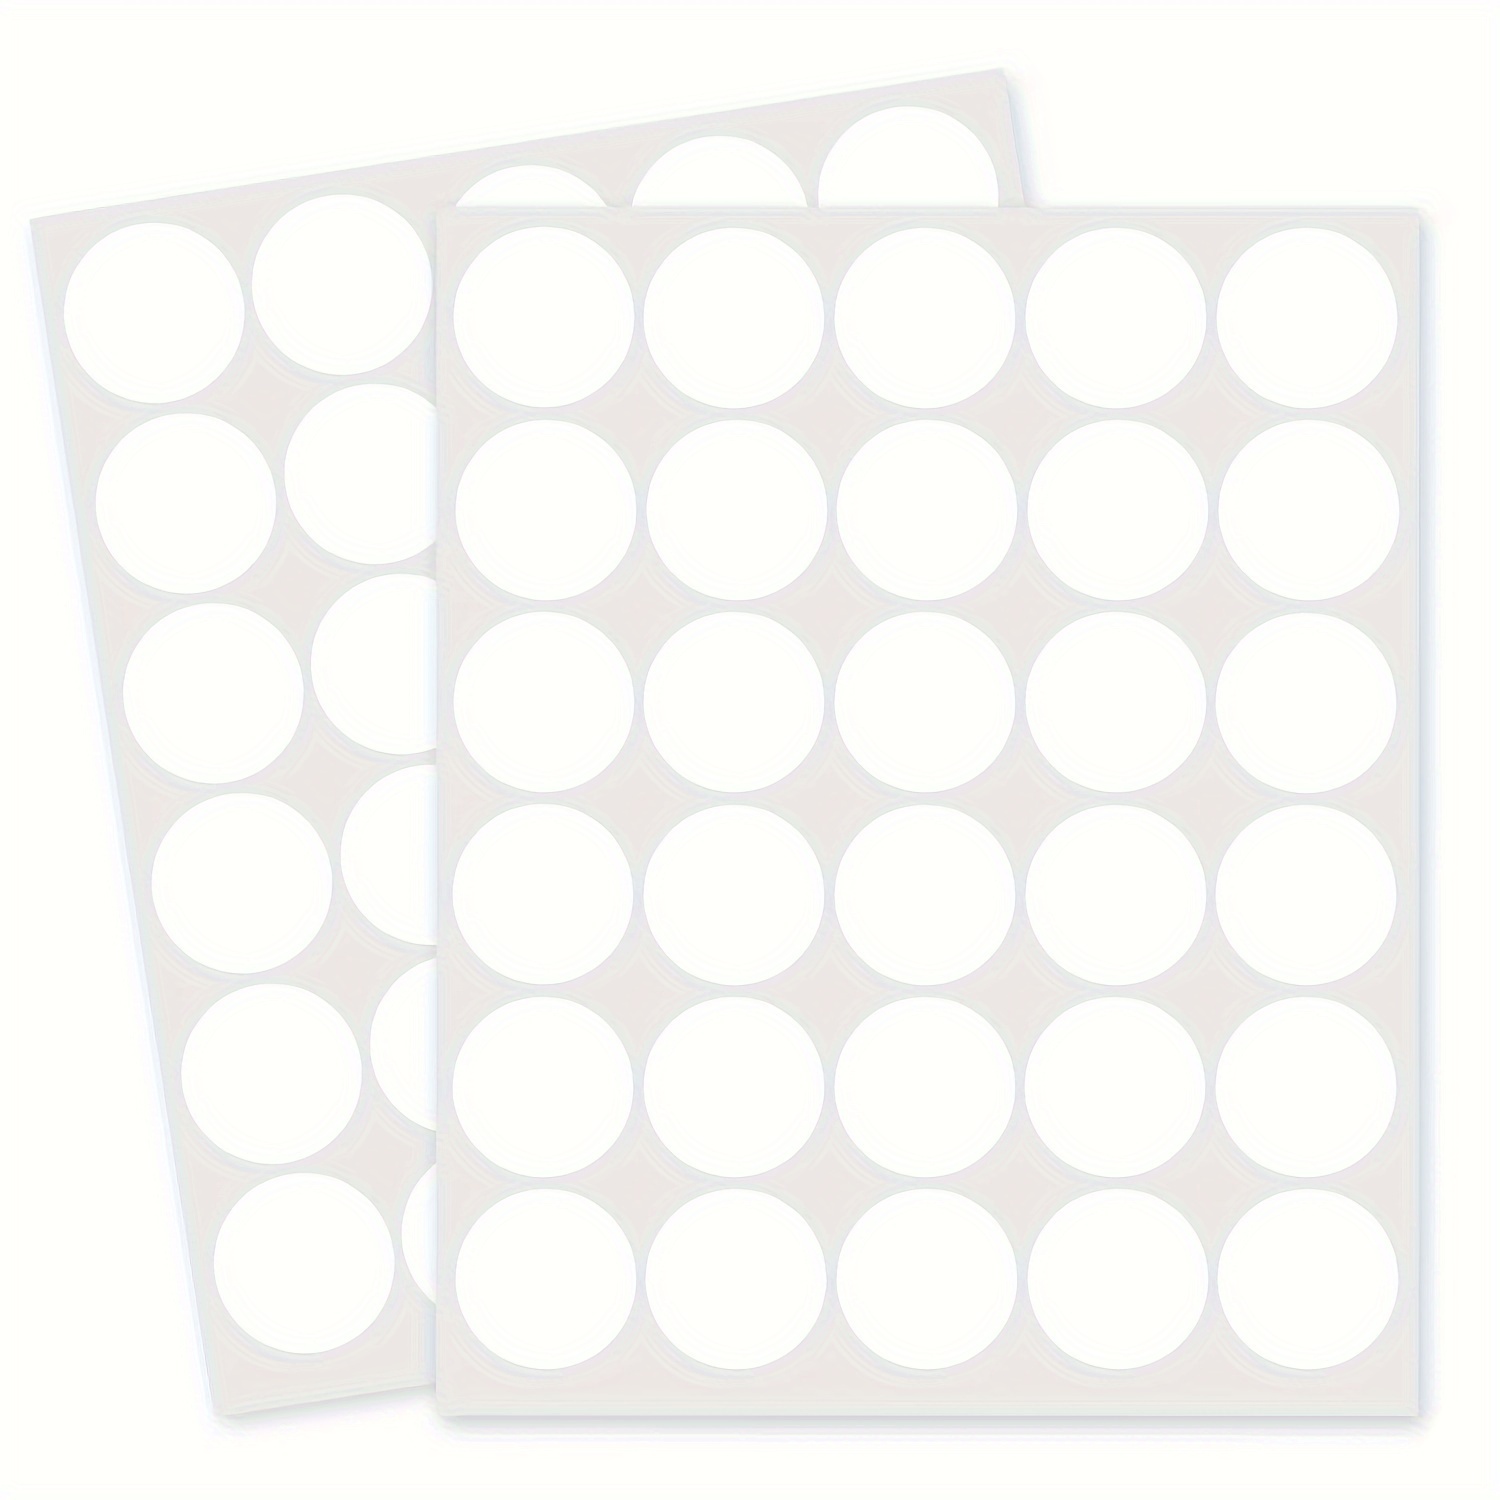 Glue Point Balloon Glue 1300 Pcs Removable Adhesive Dots, Double Sided Dots  (700)